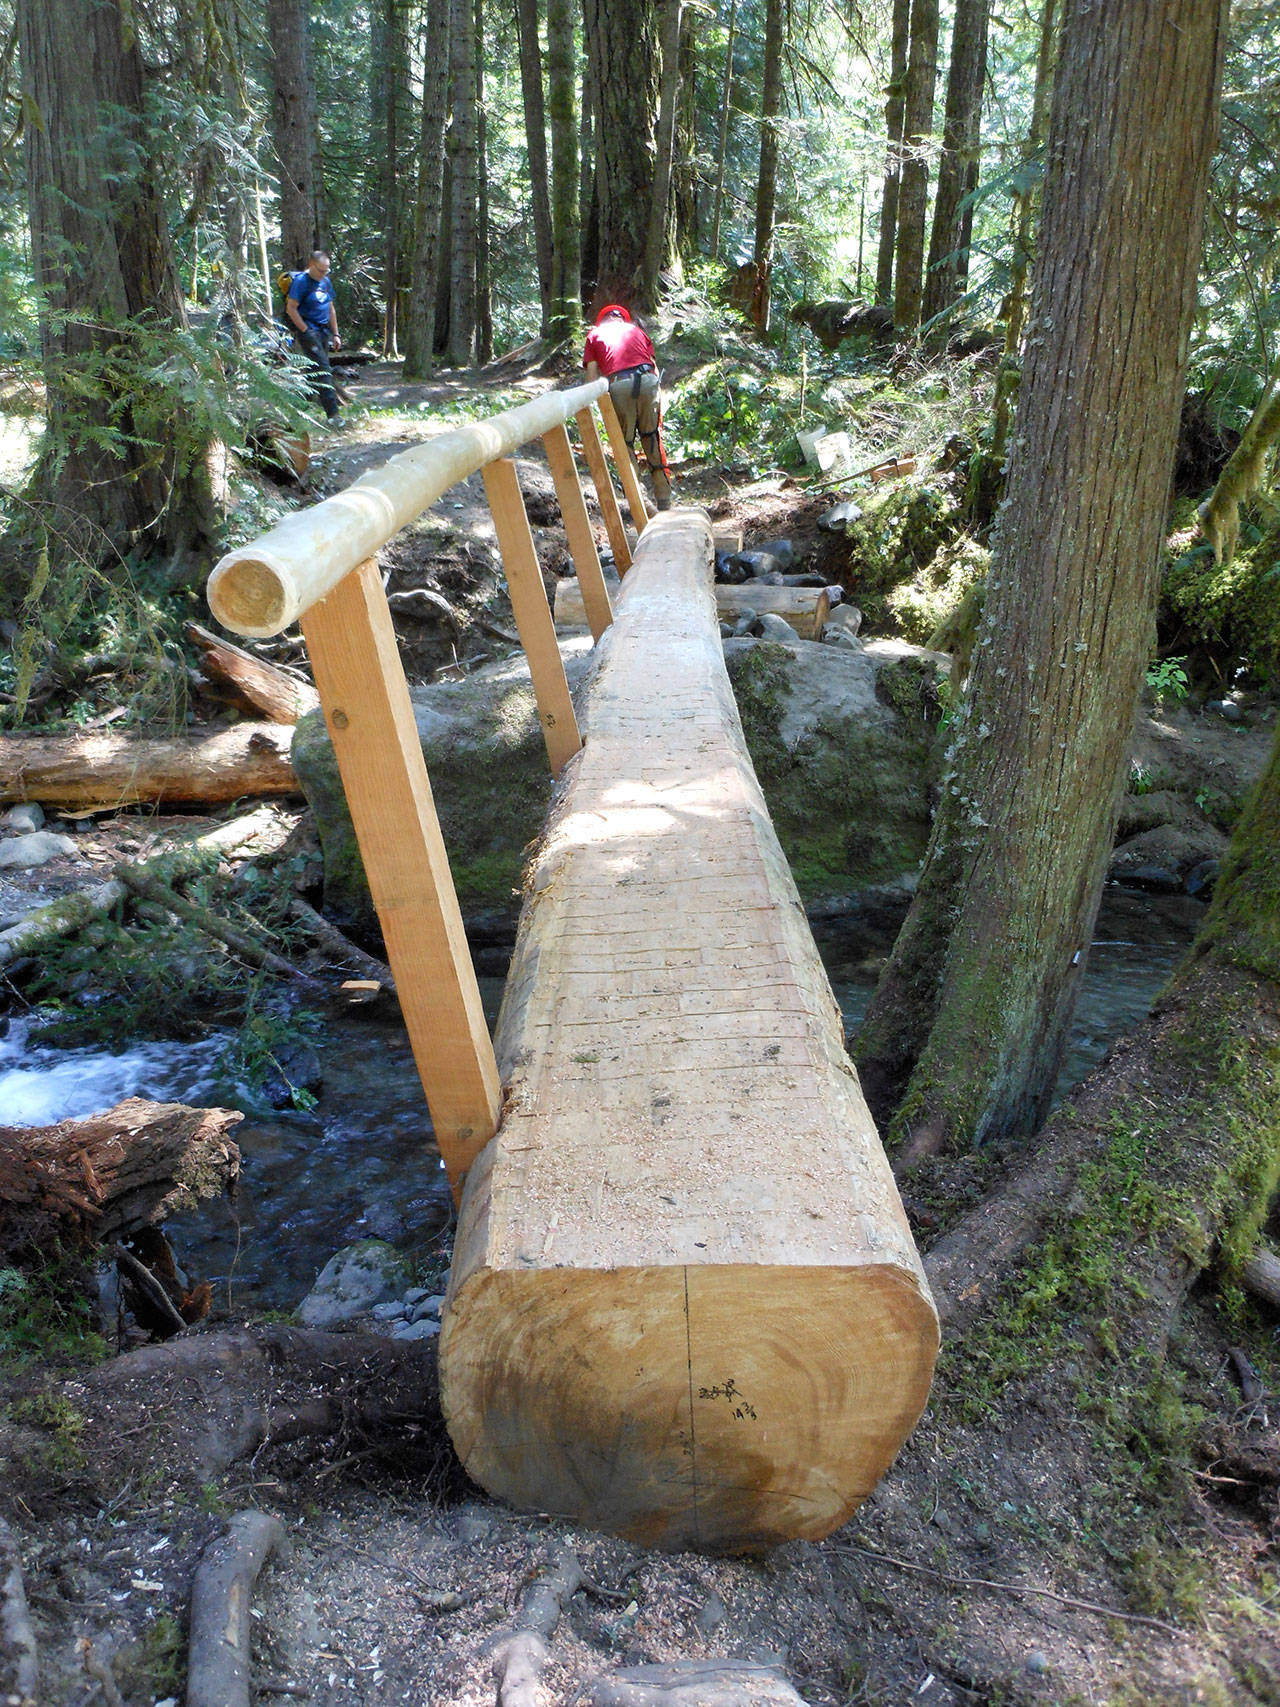 Volunteers with several groups recently installed a foot log near Gold Creek for hikers to better traverse the area. The U.S. Forest Service plans to consider options that change access points at several spots in the Olympic National Forest, including moving and expanding Gold Creek’s trailhead. Submitted photo